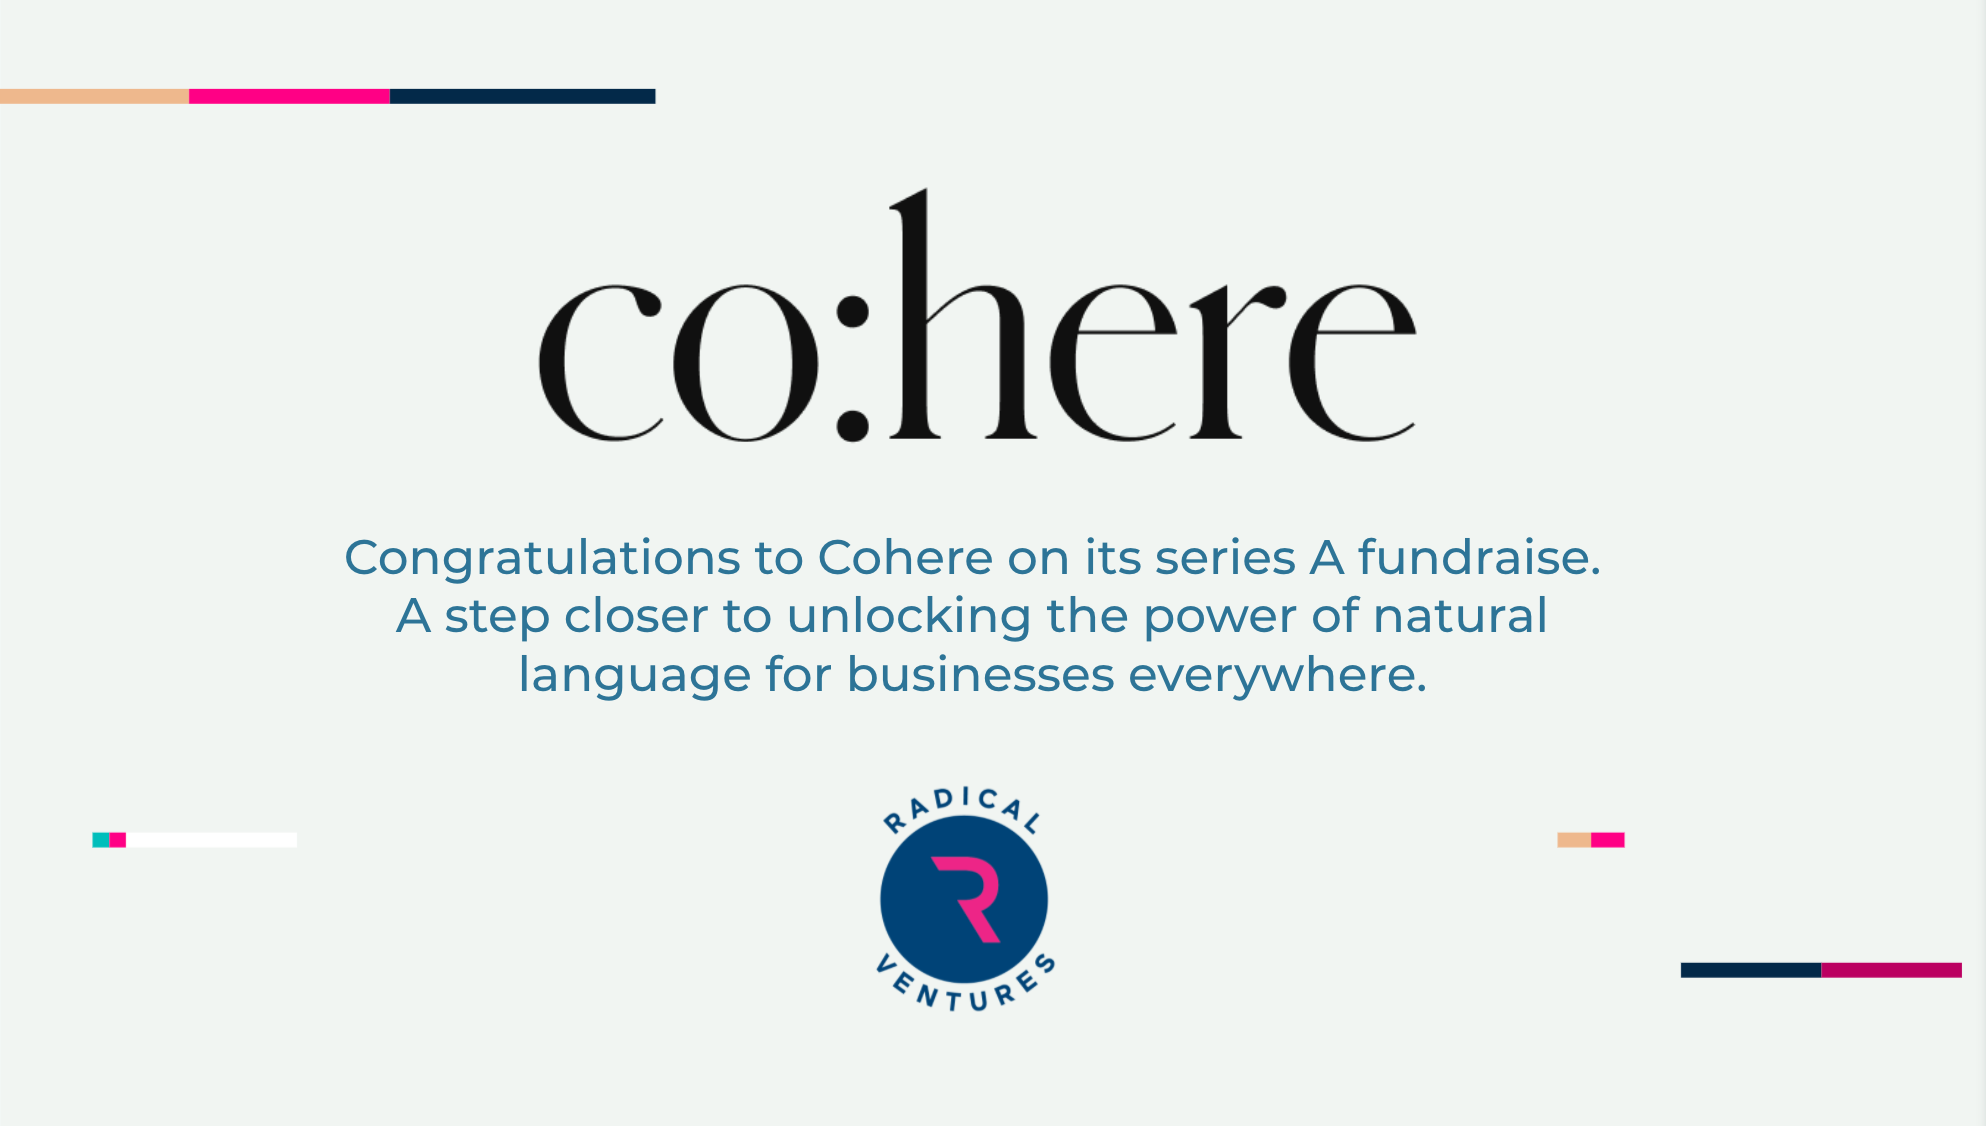 Radical Ventures congratulates Cohere on its series A fundraise. A steps closer to unlocking the power of natural language for business everywhere. 